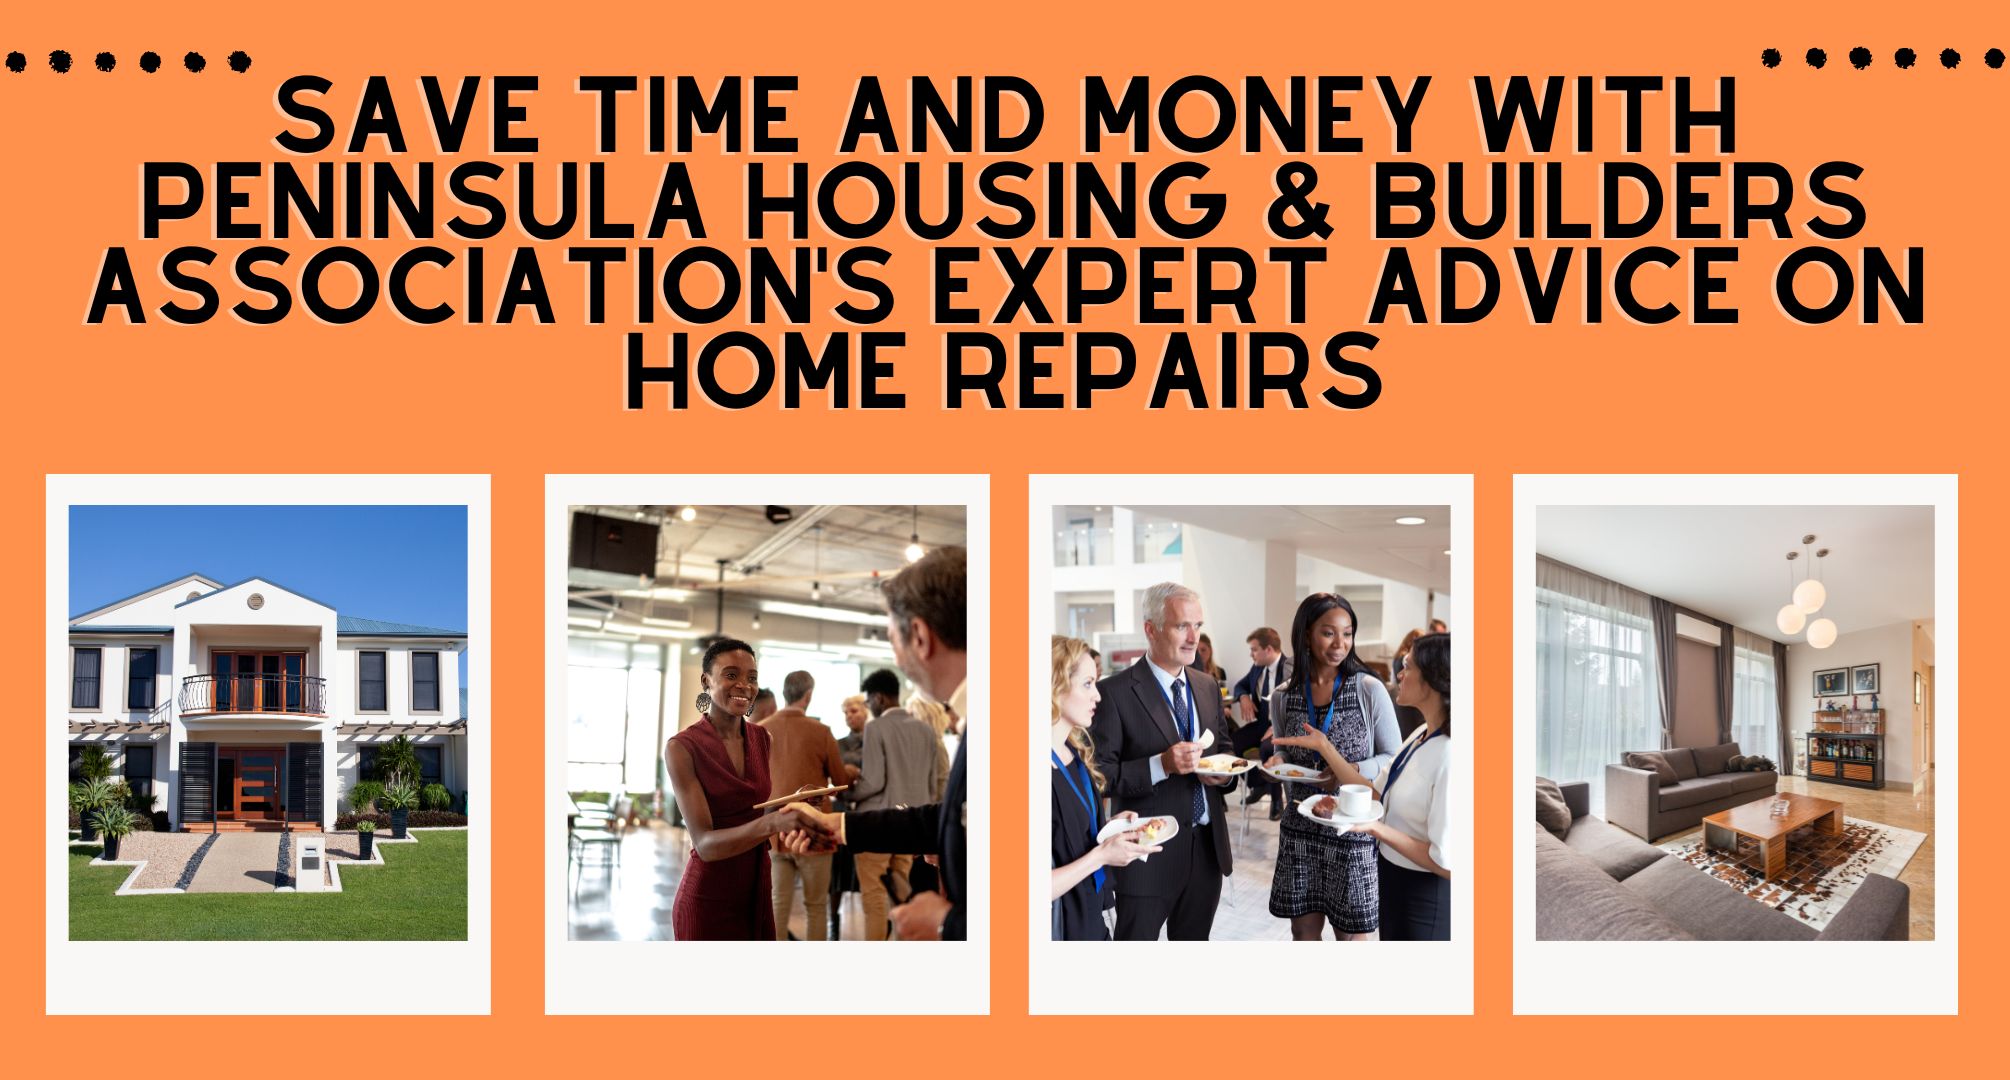 Save Time and Money with Peninsula Housing & Builders Association's Expert Advice on Home Repairs